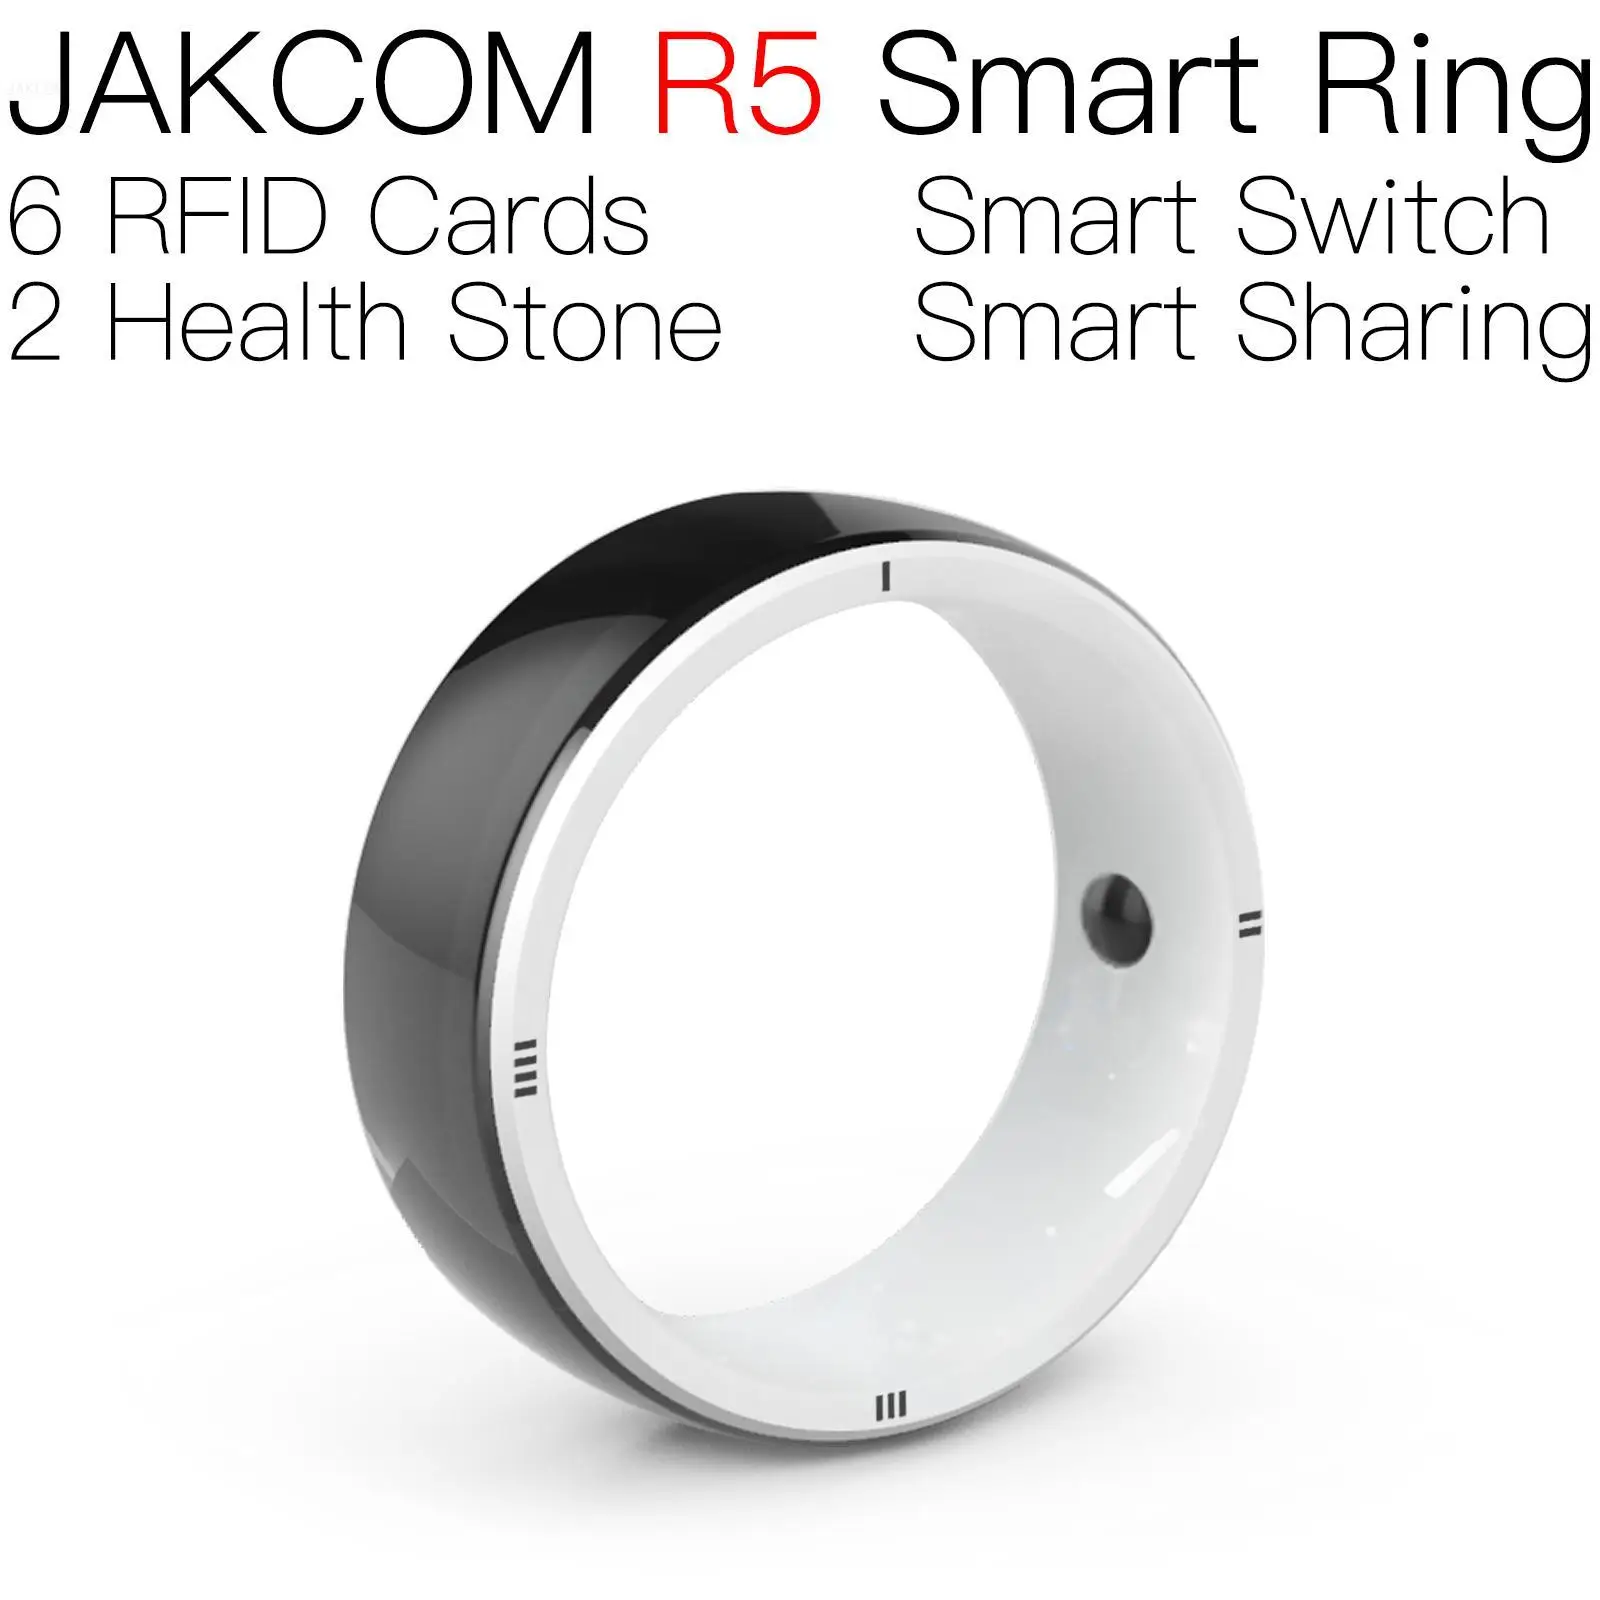 

JAKCOM R5 Smart Ring Super value than rfid high range black metal nfc customize id card italy adhesive 134 pet global for pc